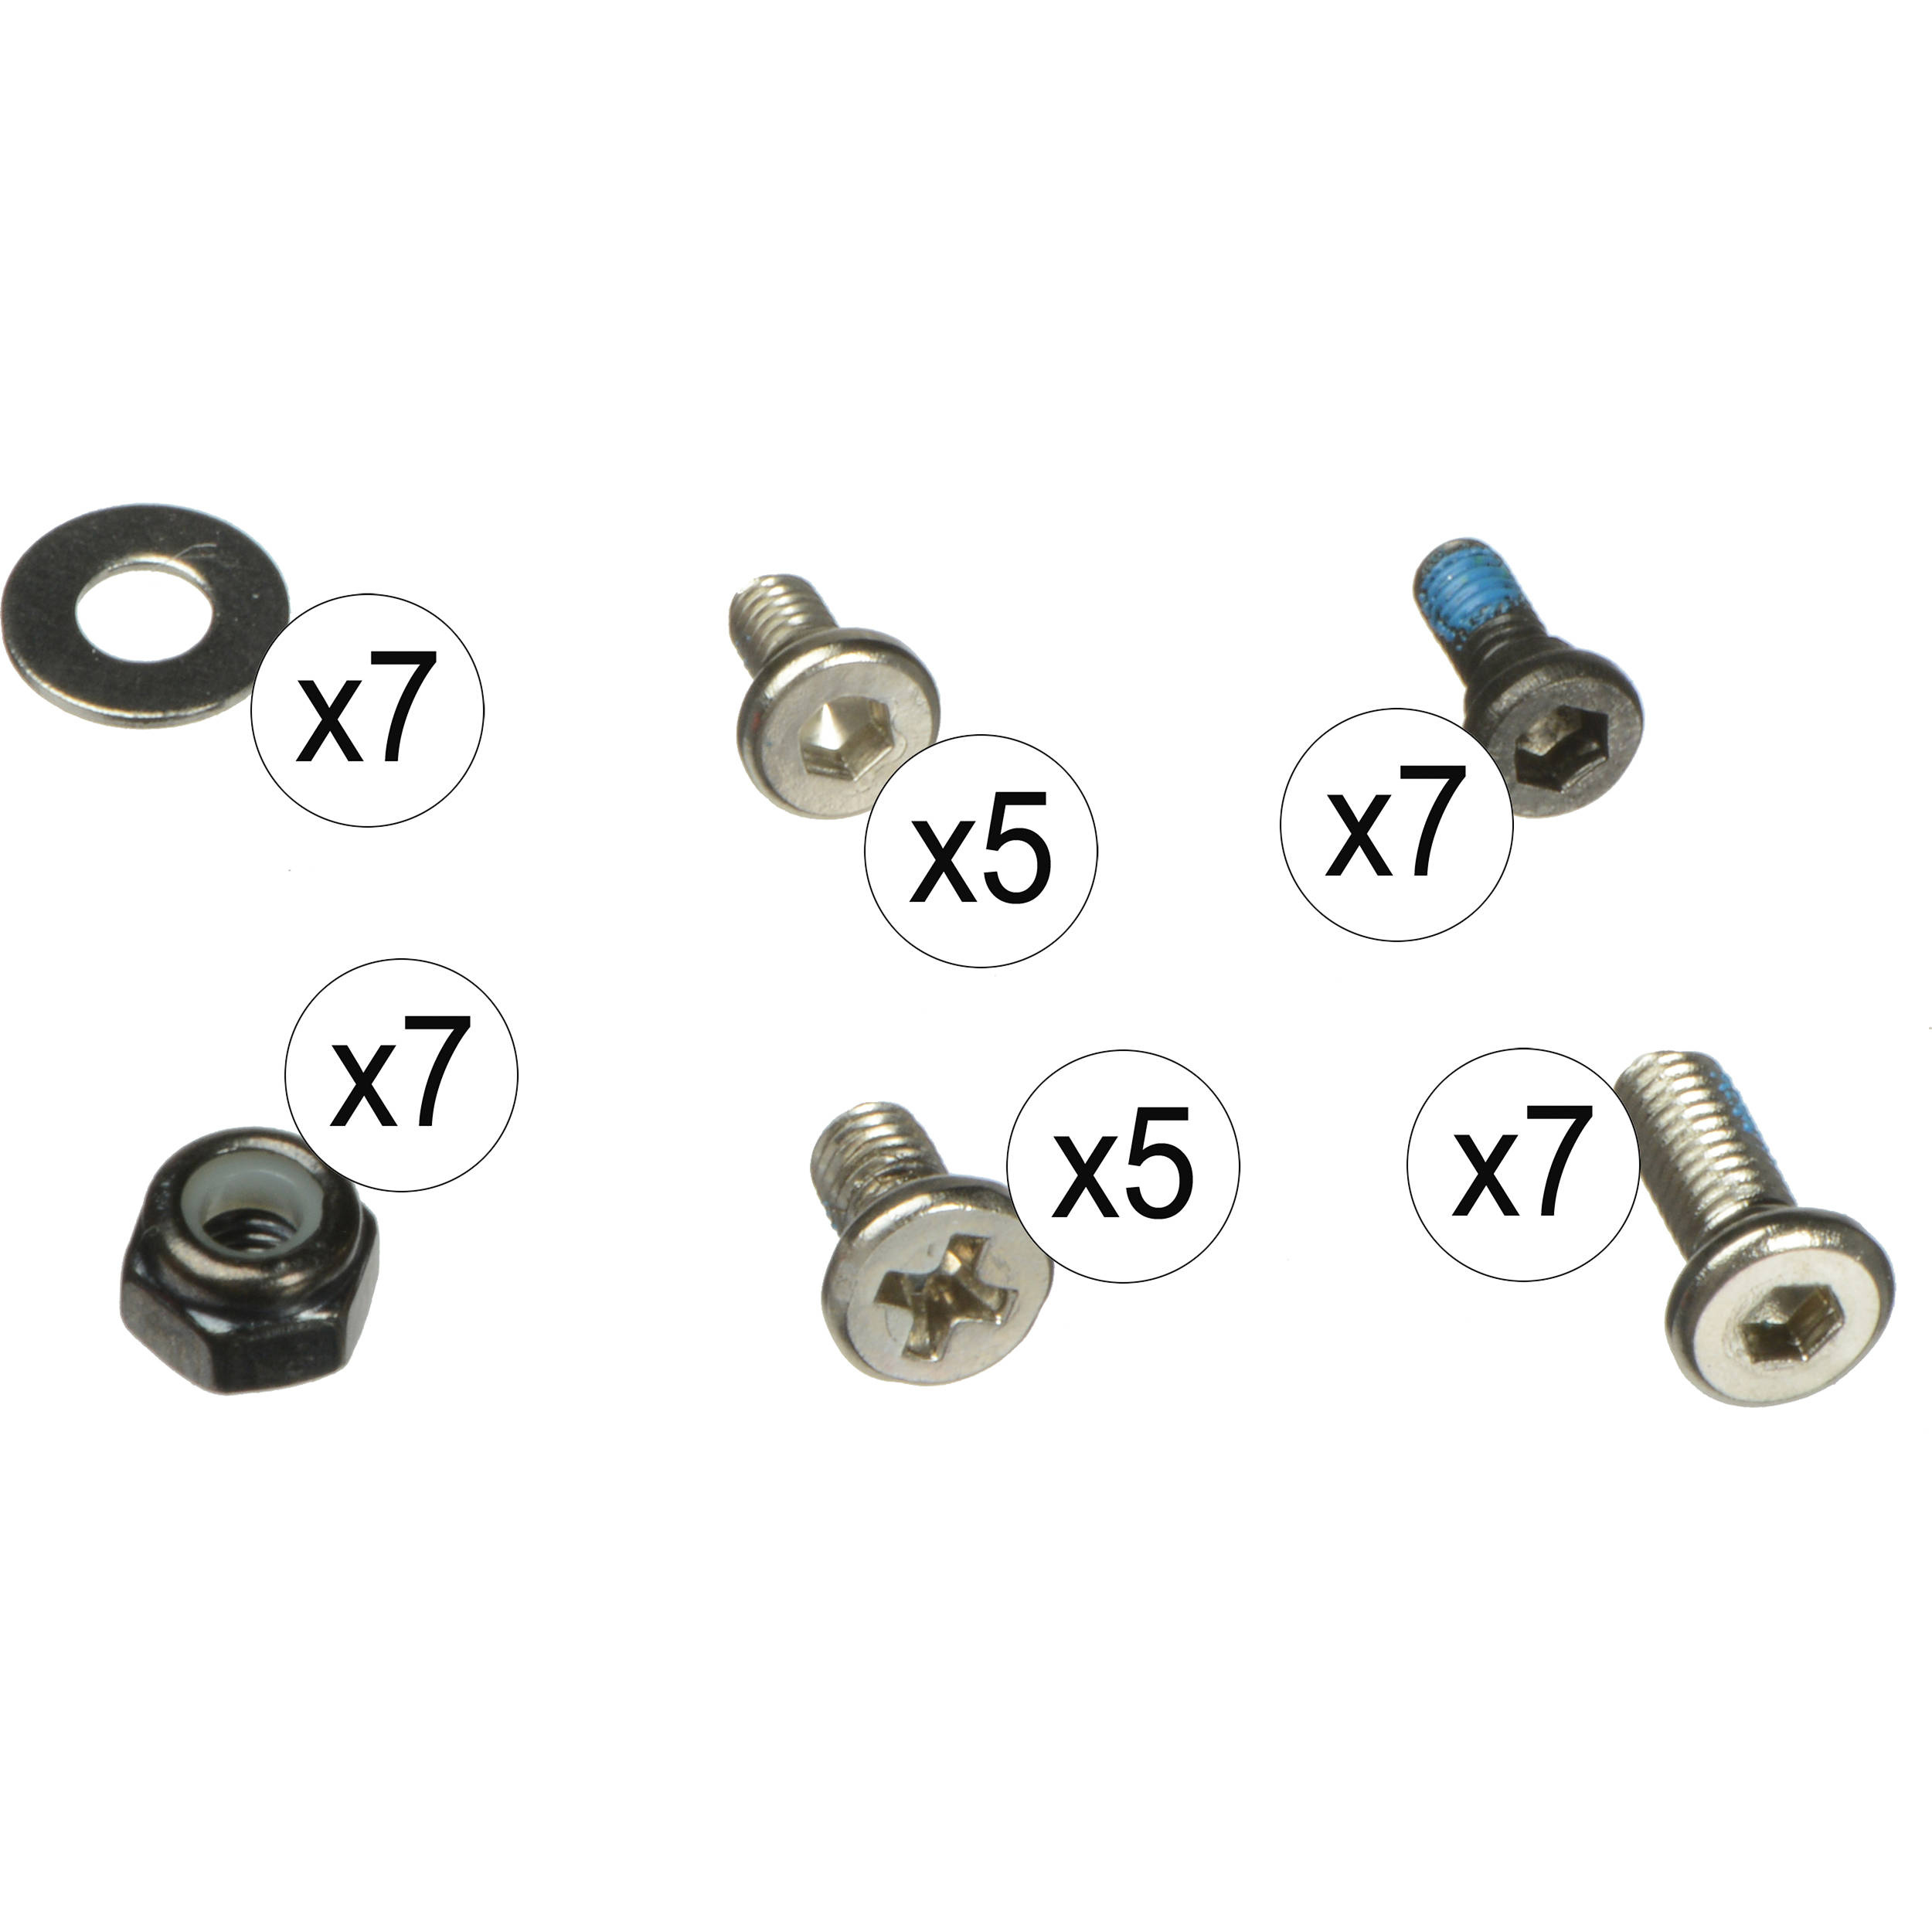 DJI Screw Pack for Zenmuse H3-3D Gimbal (Part 45)